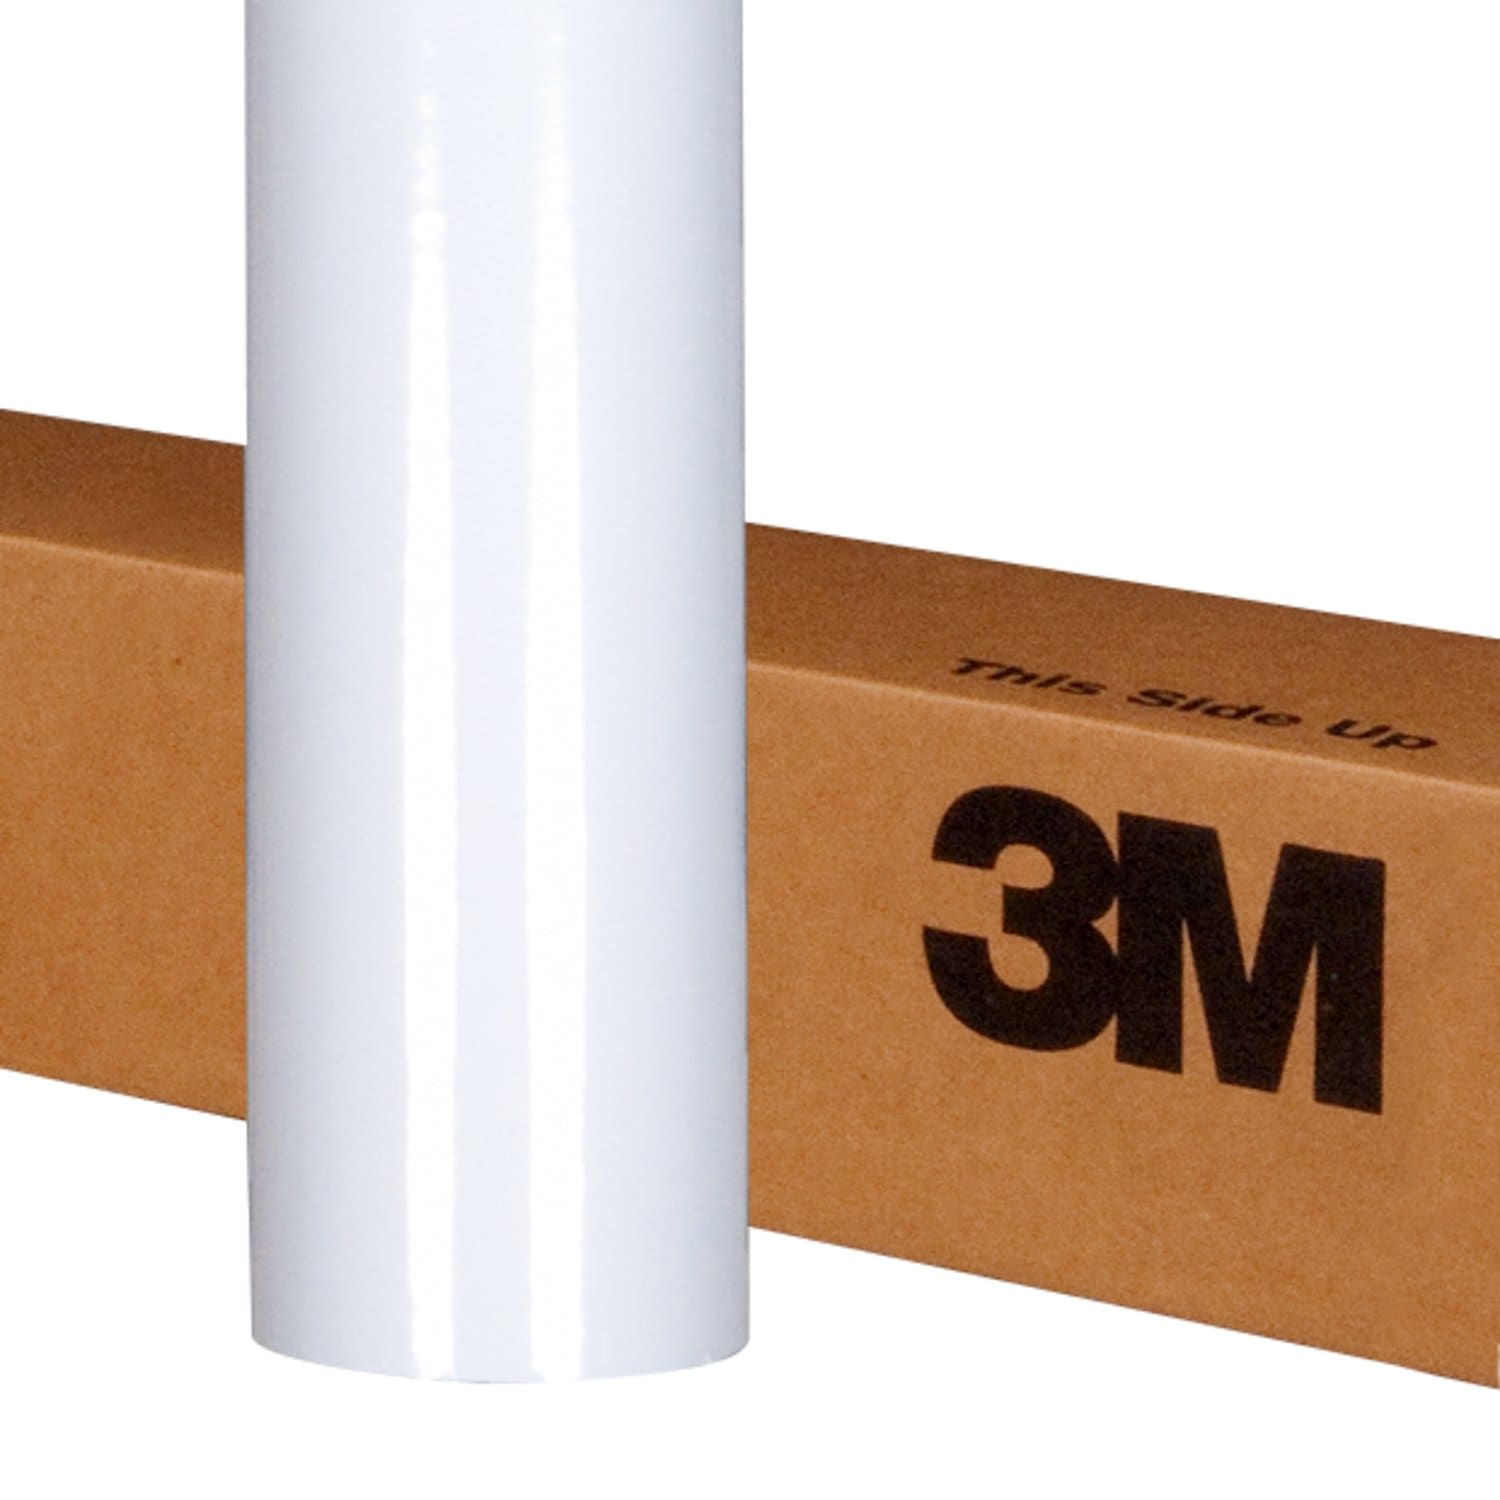 7010303216 - 3M Scotchcal Graphic Film 3650-10, White, (12 in x 15 in, Box), Double
Butt Splice, 12 in x 250 yd